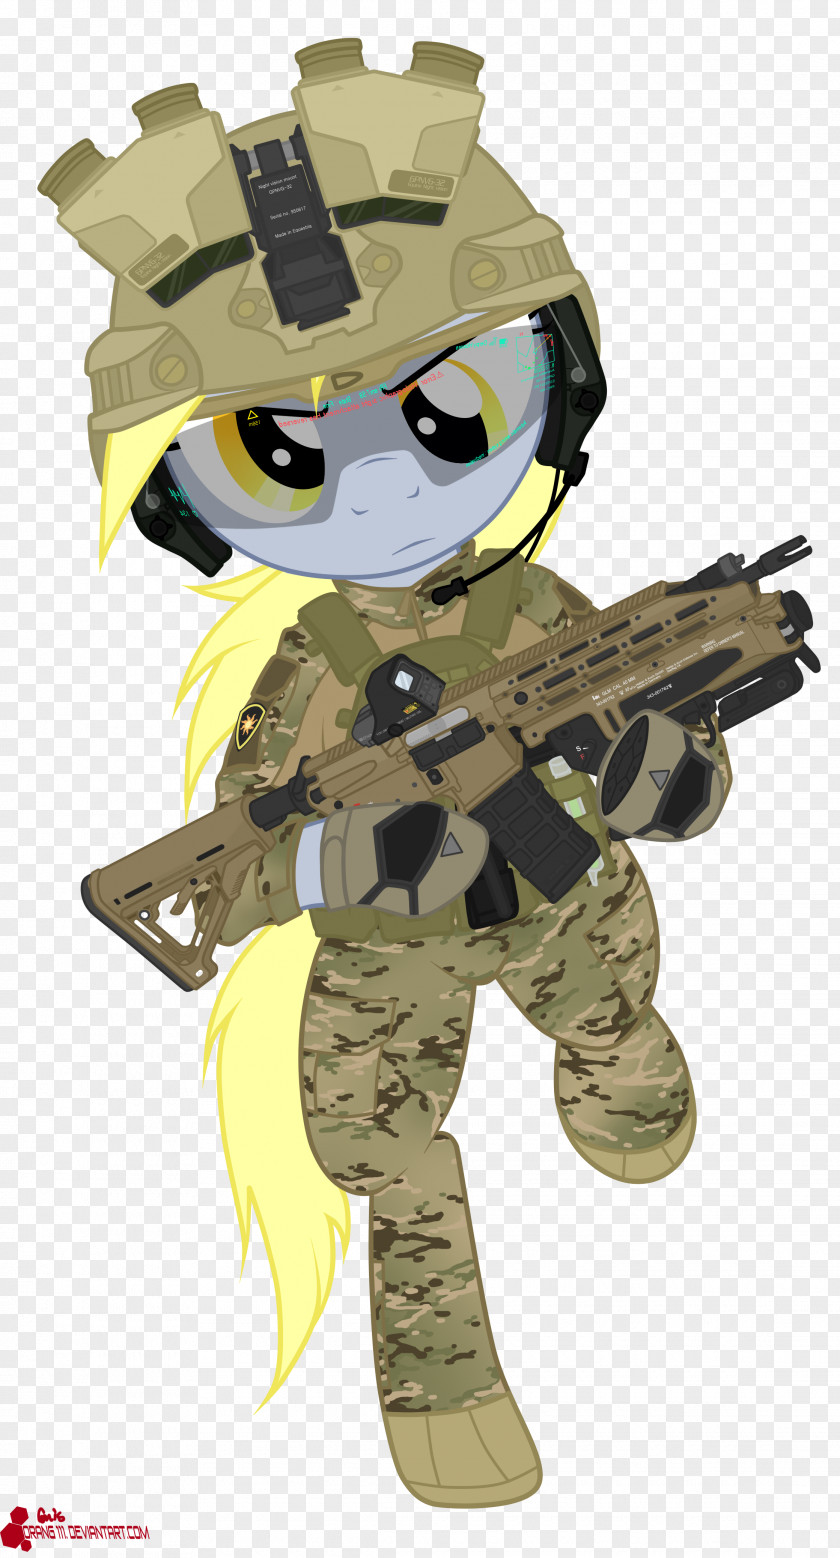 Soldier Derpy Hooves Pony Firearm Army PNG